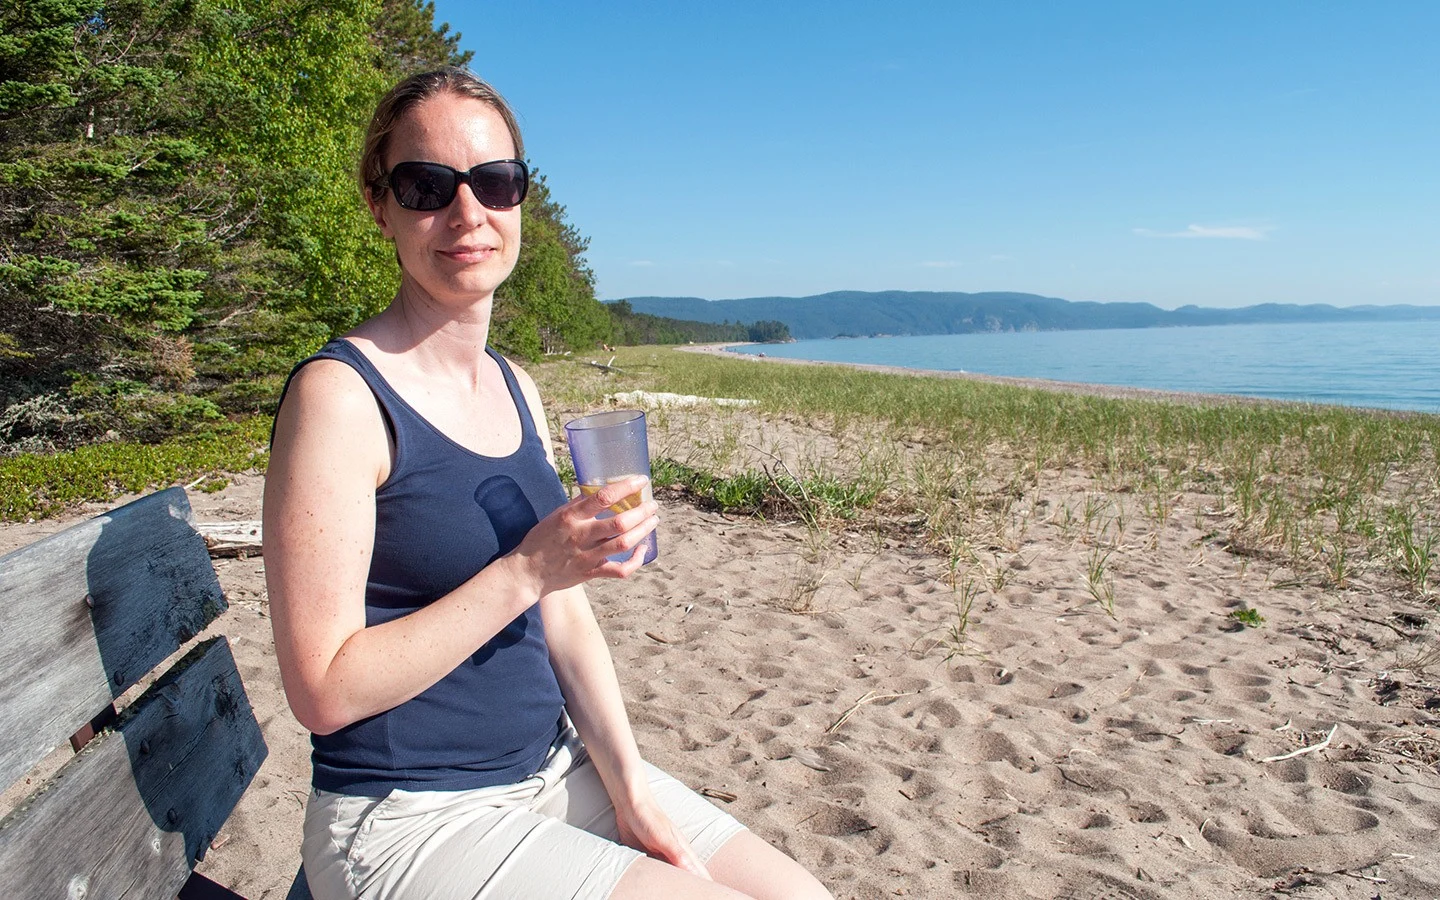 Drinks on the beach at Lake Superior Provincial Park